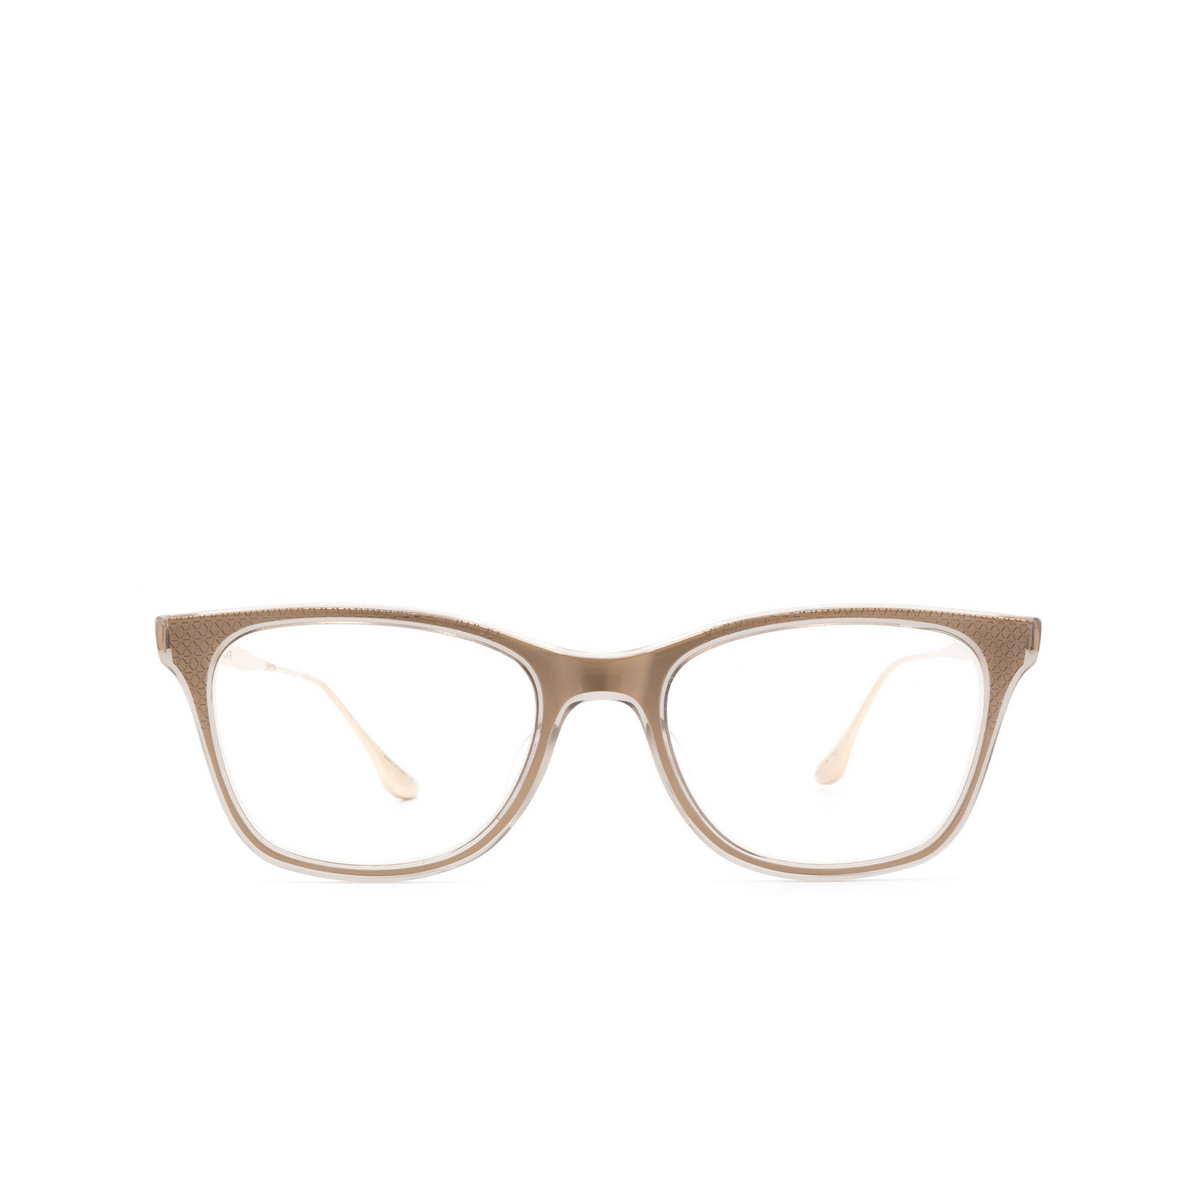 Dita DTX505 Eyeglasses GRY-GLD - front view